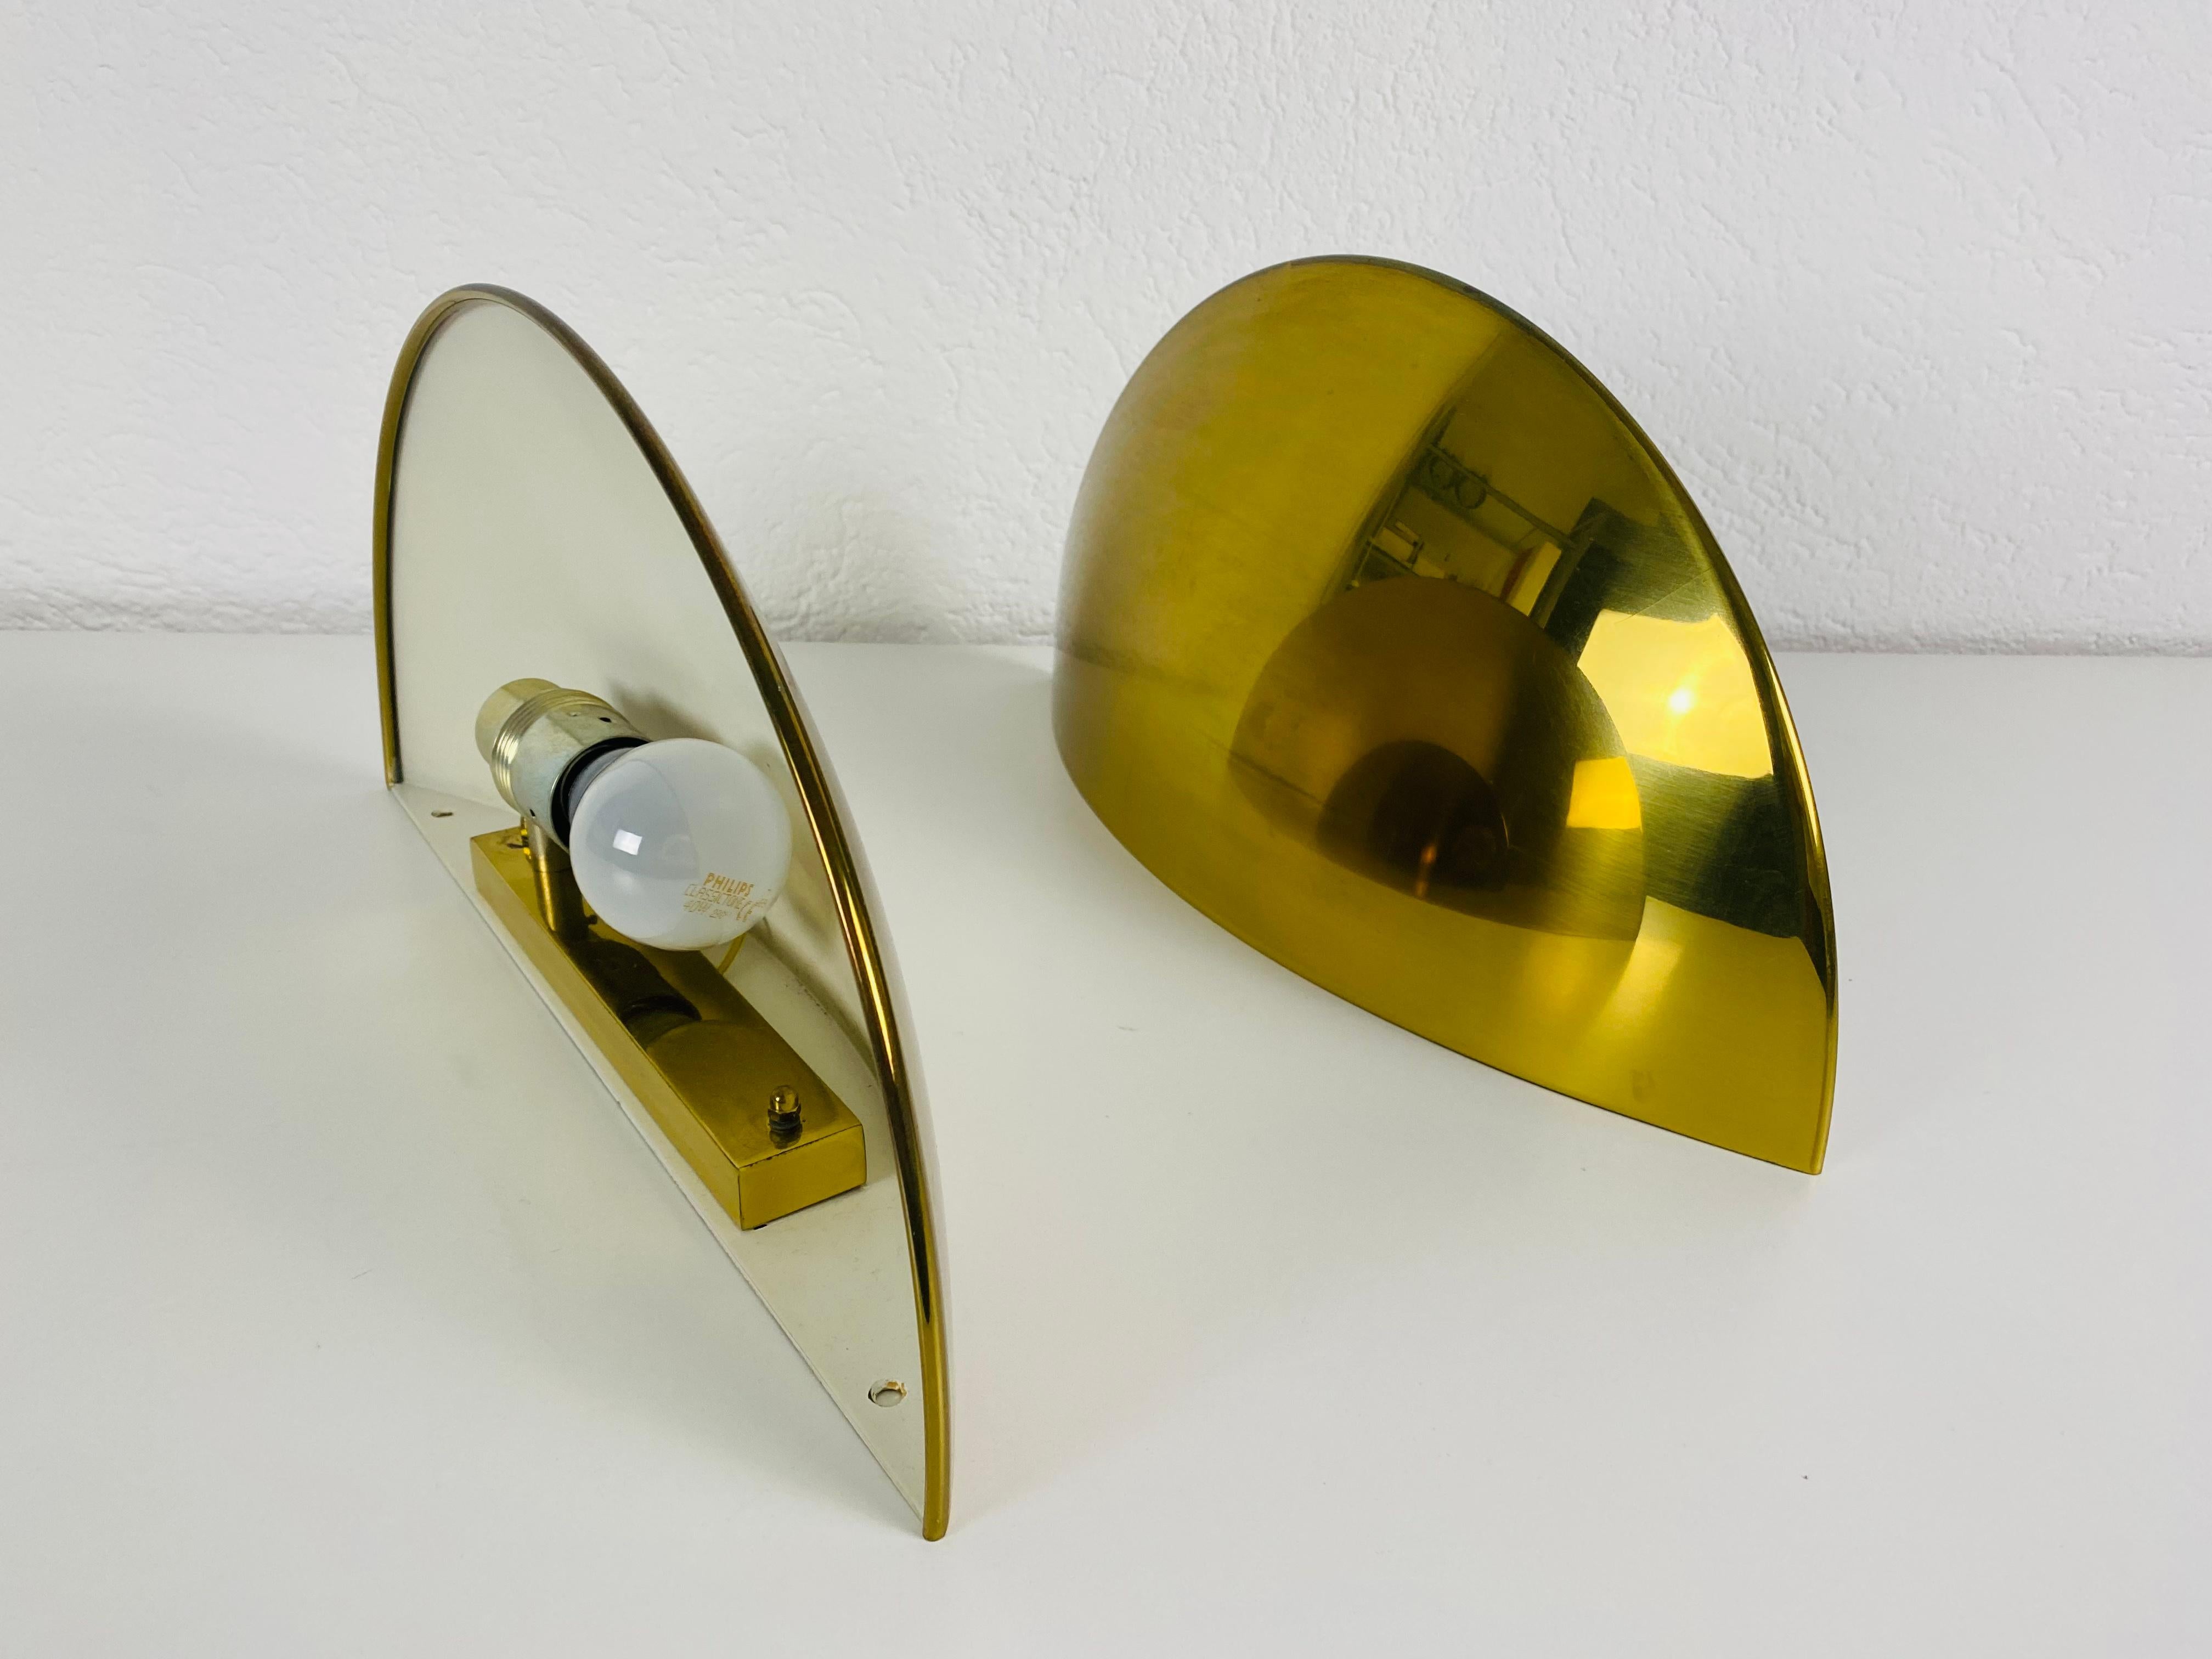 Pair of Florian Schulz Midcentury Brass Wall Lamps, 1960s For Sale 2